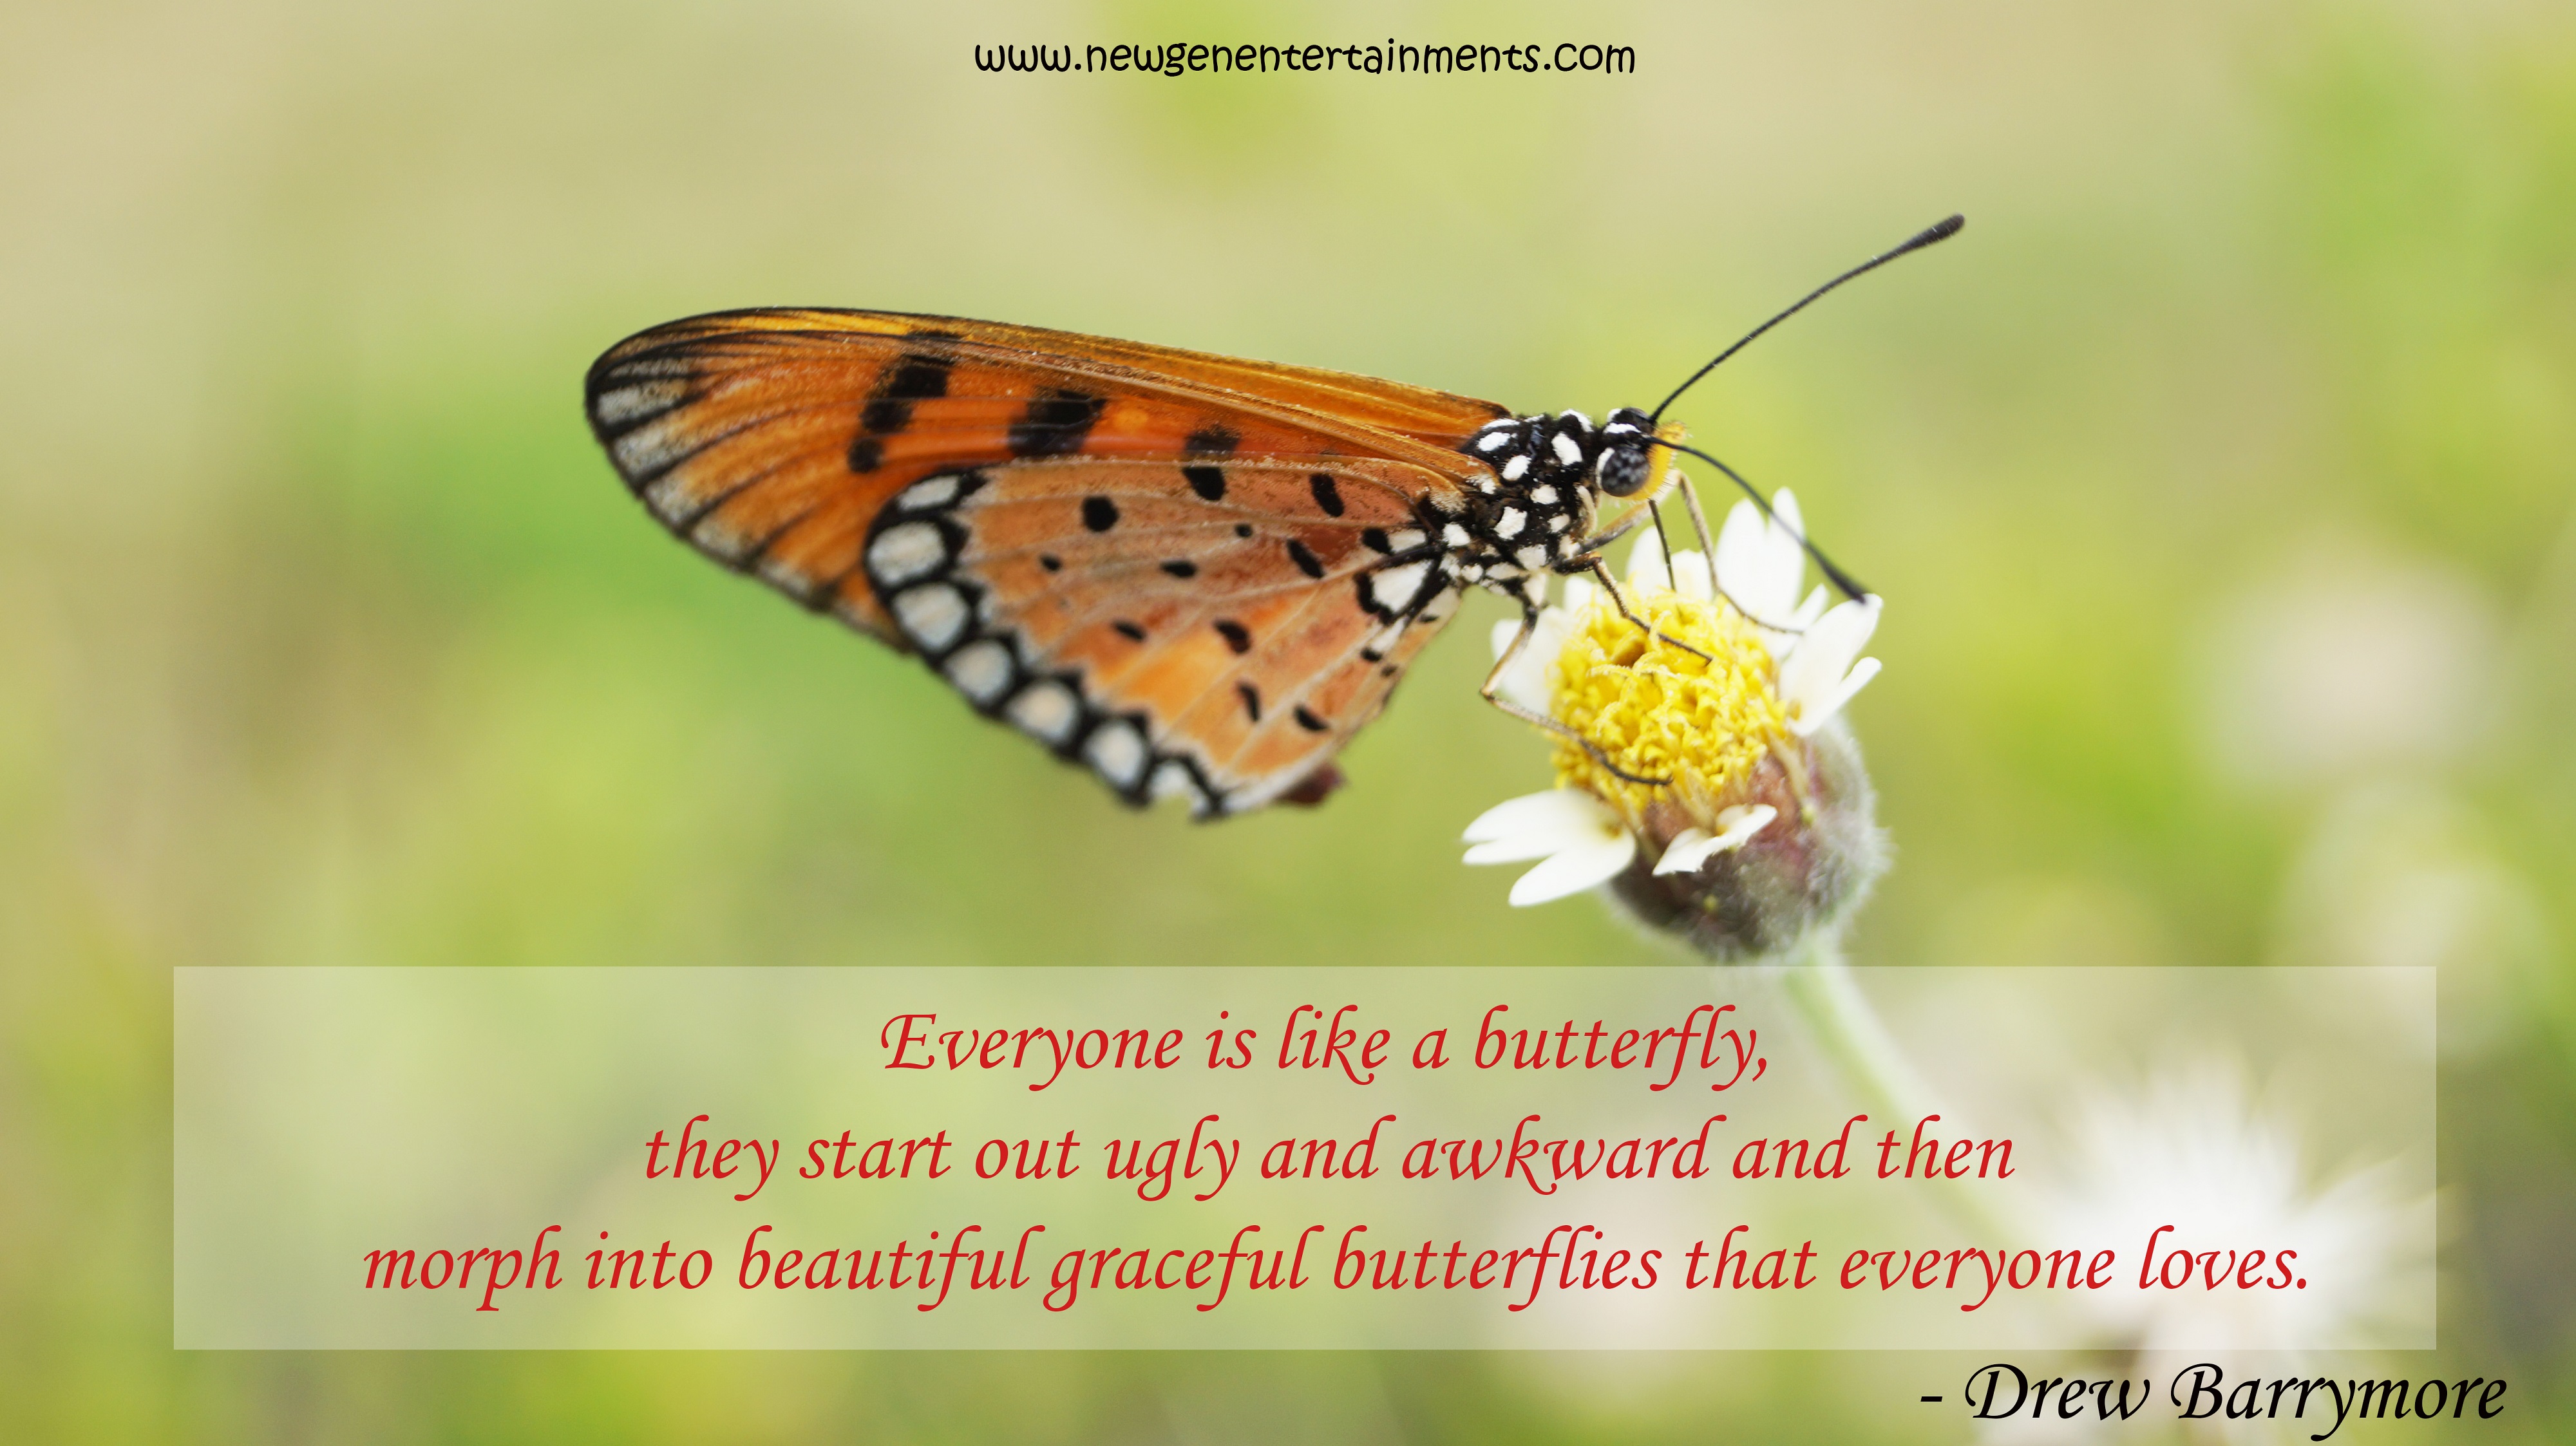 Everyone is like a butterfly, they start out ugly and awkward and then morph into beautiful graceful butterflies that everyone loves